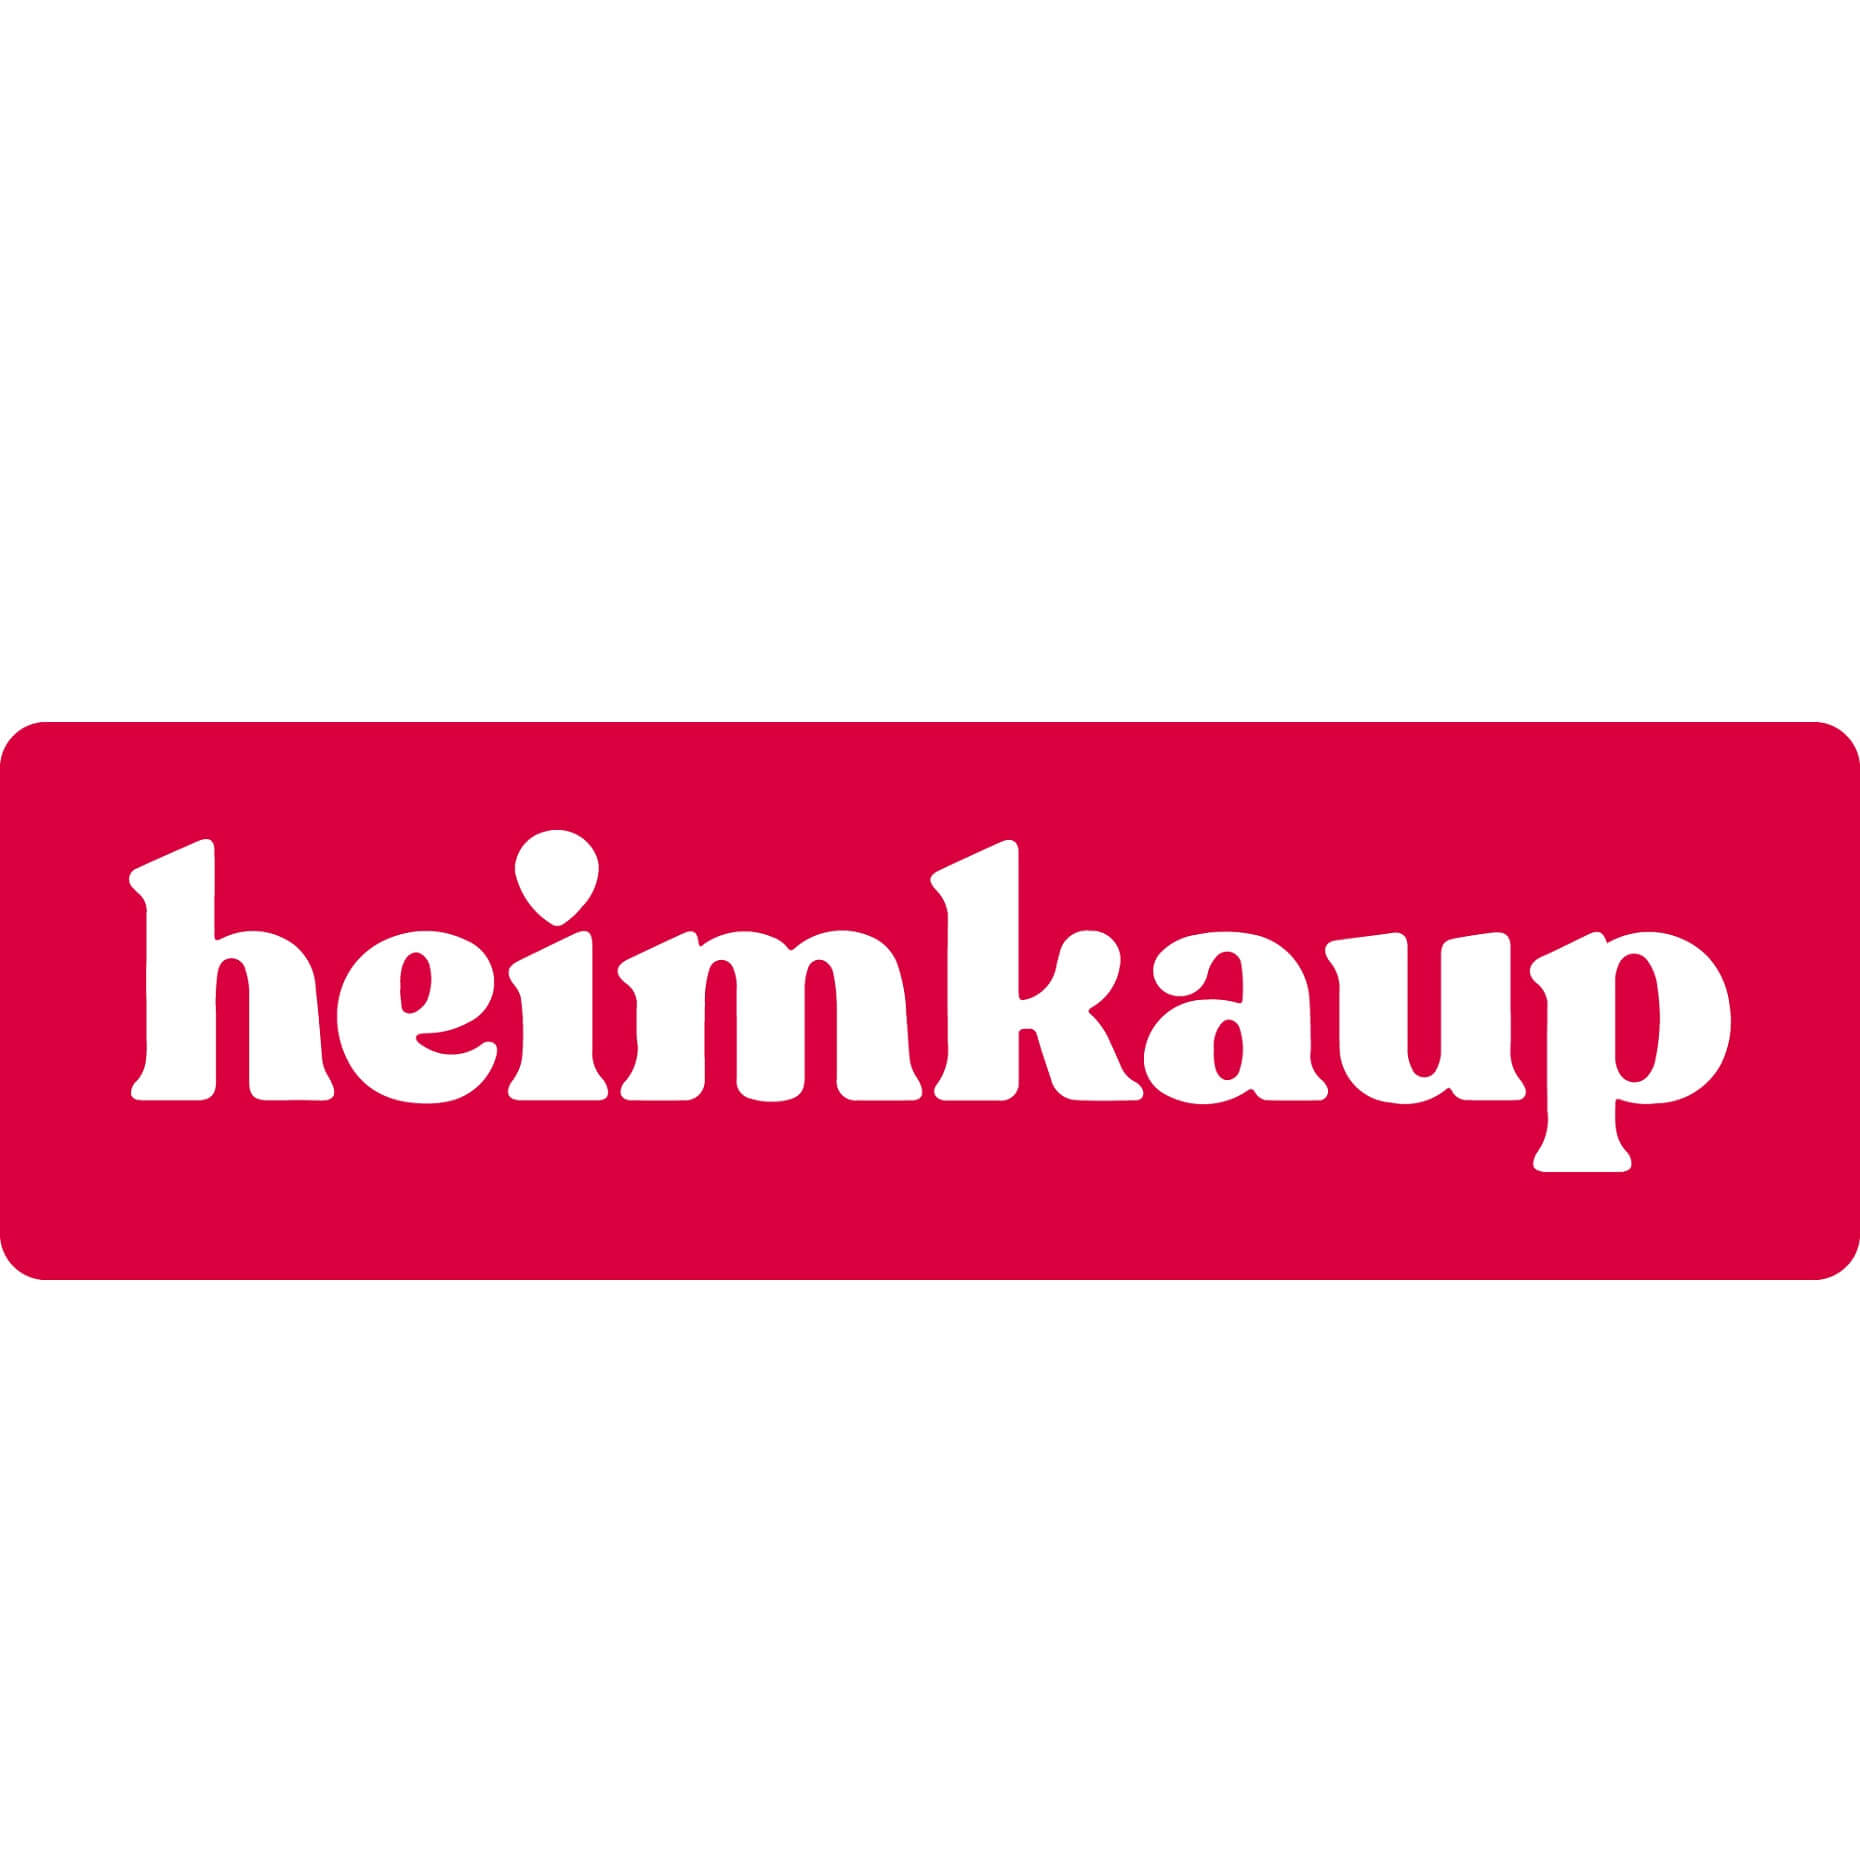 Home delivery alcohol available from Heimkaup